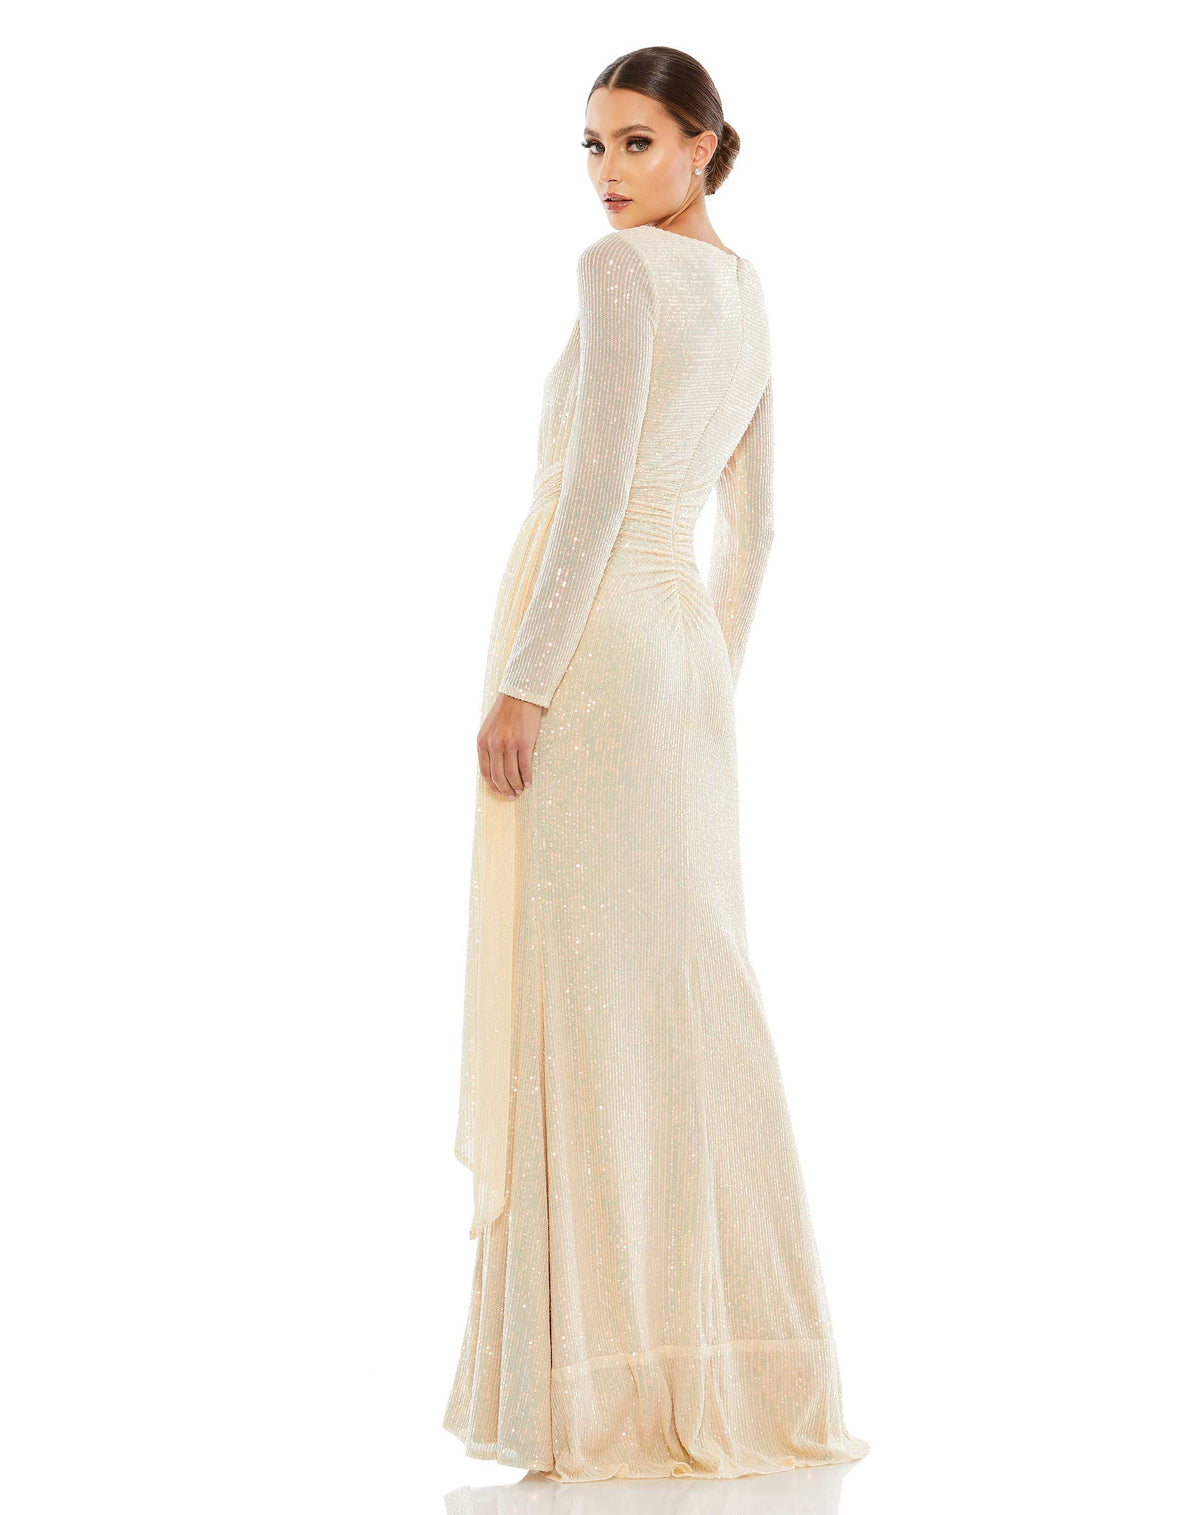 This elegant Mac Duggal, long sleeved, neutral tone, creamy pearl, elegant evening gown with a high, boat-neck is a chic evening dress perfect for special occasions, weddings, engagement parties and Winter formals. This sequin, gown in soft pearl flatters with its wrap detail at the waist and a thigh-split. This floor-length gown also makes an excellent modest brides dress!    back